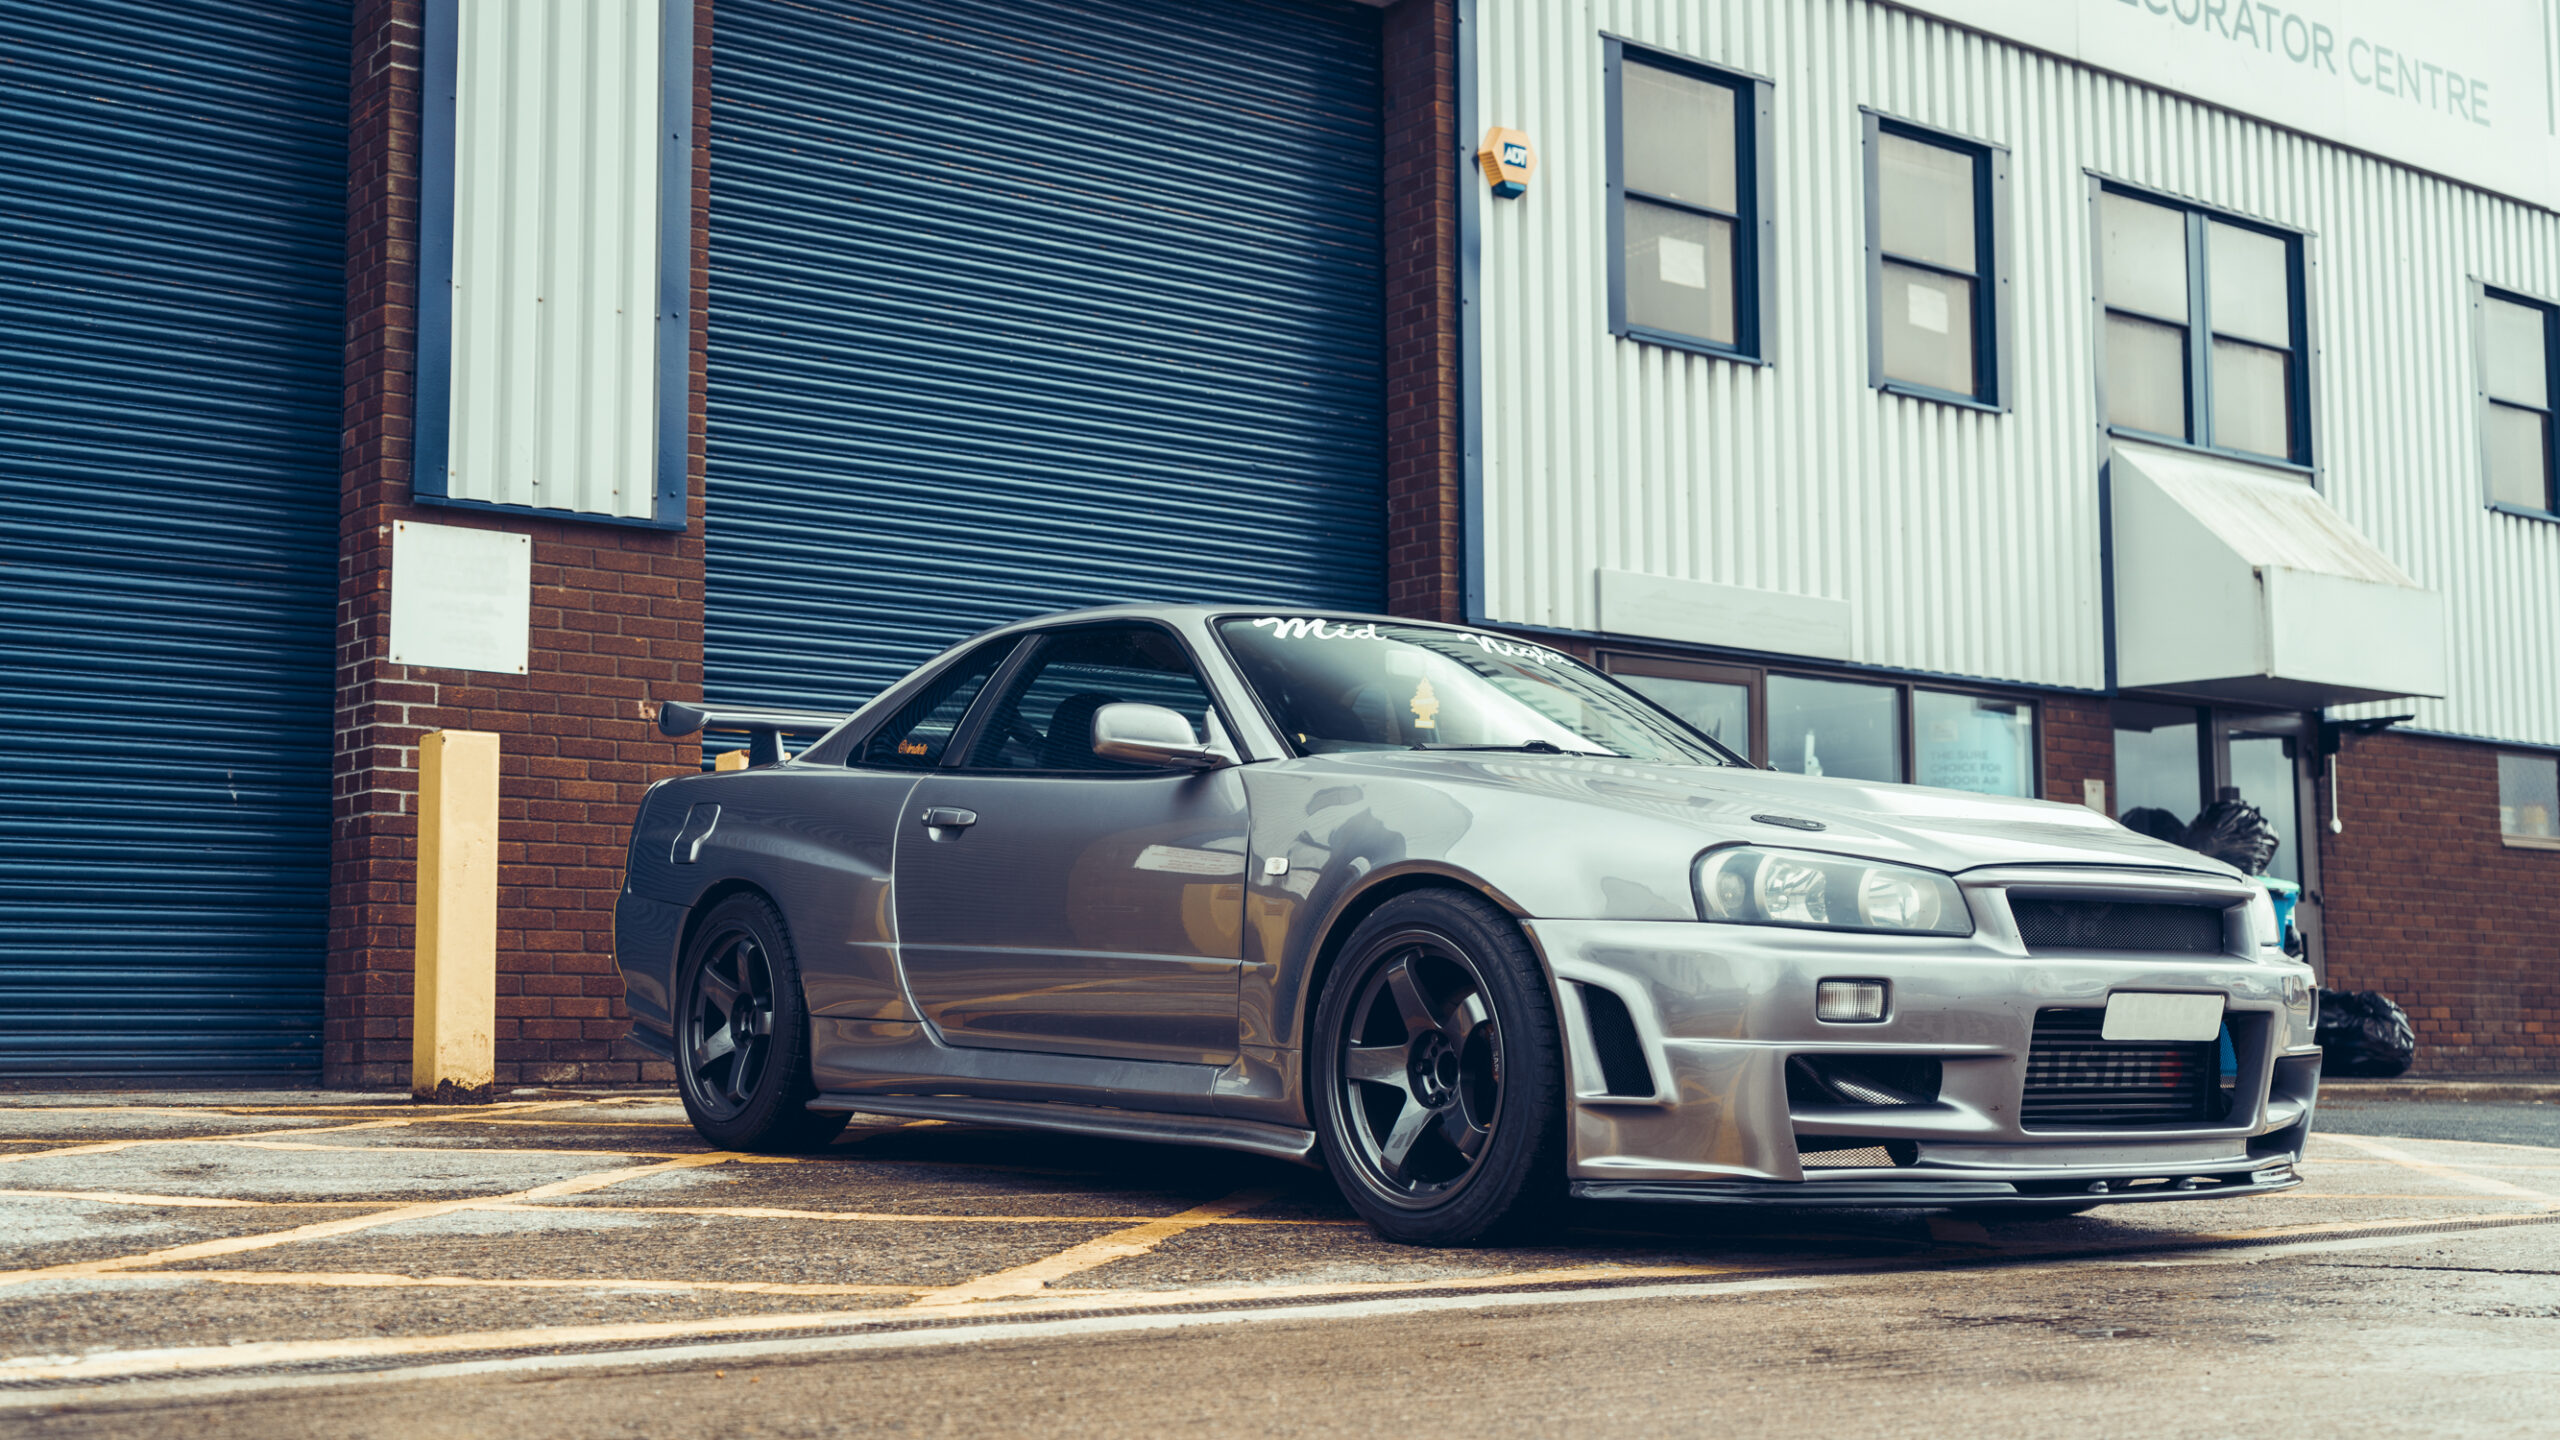 Featured image for “A Skyline gets the Enginetuner touch”